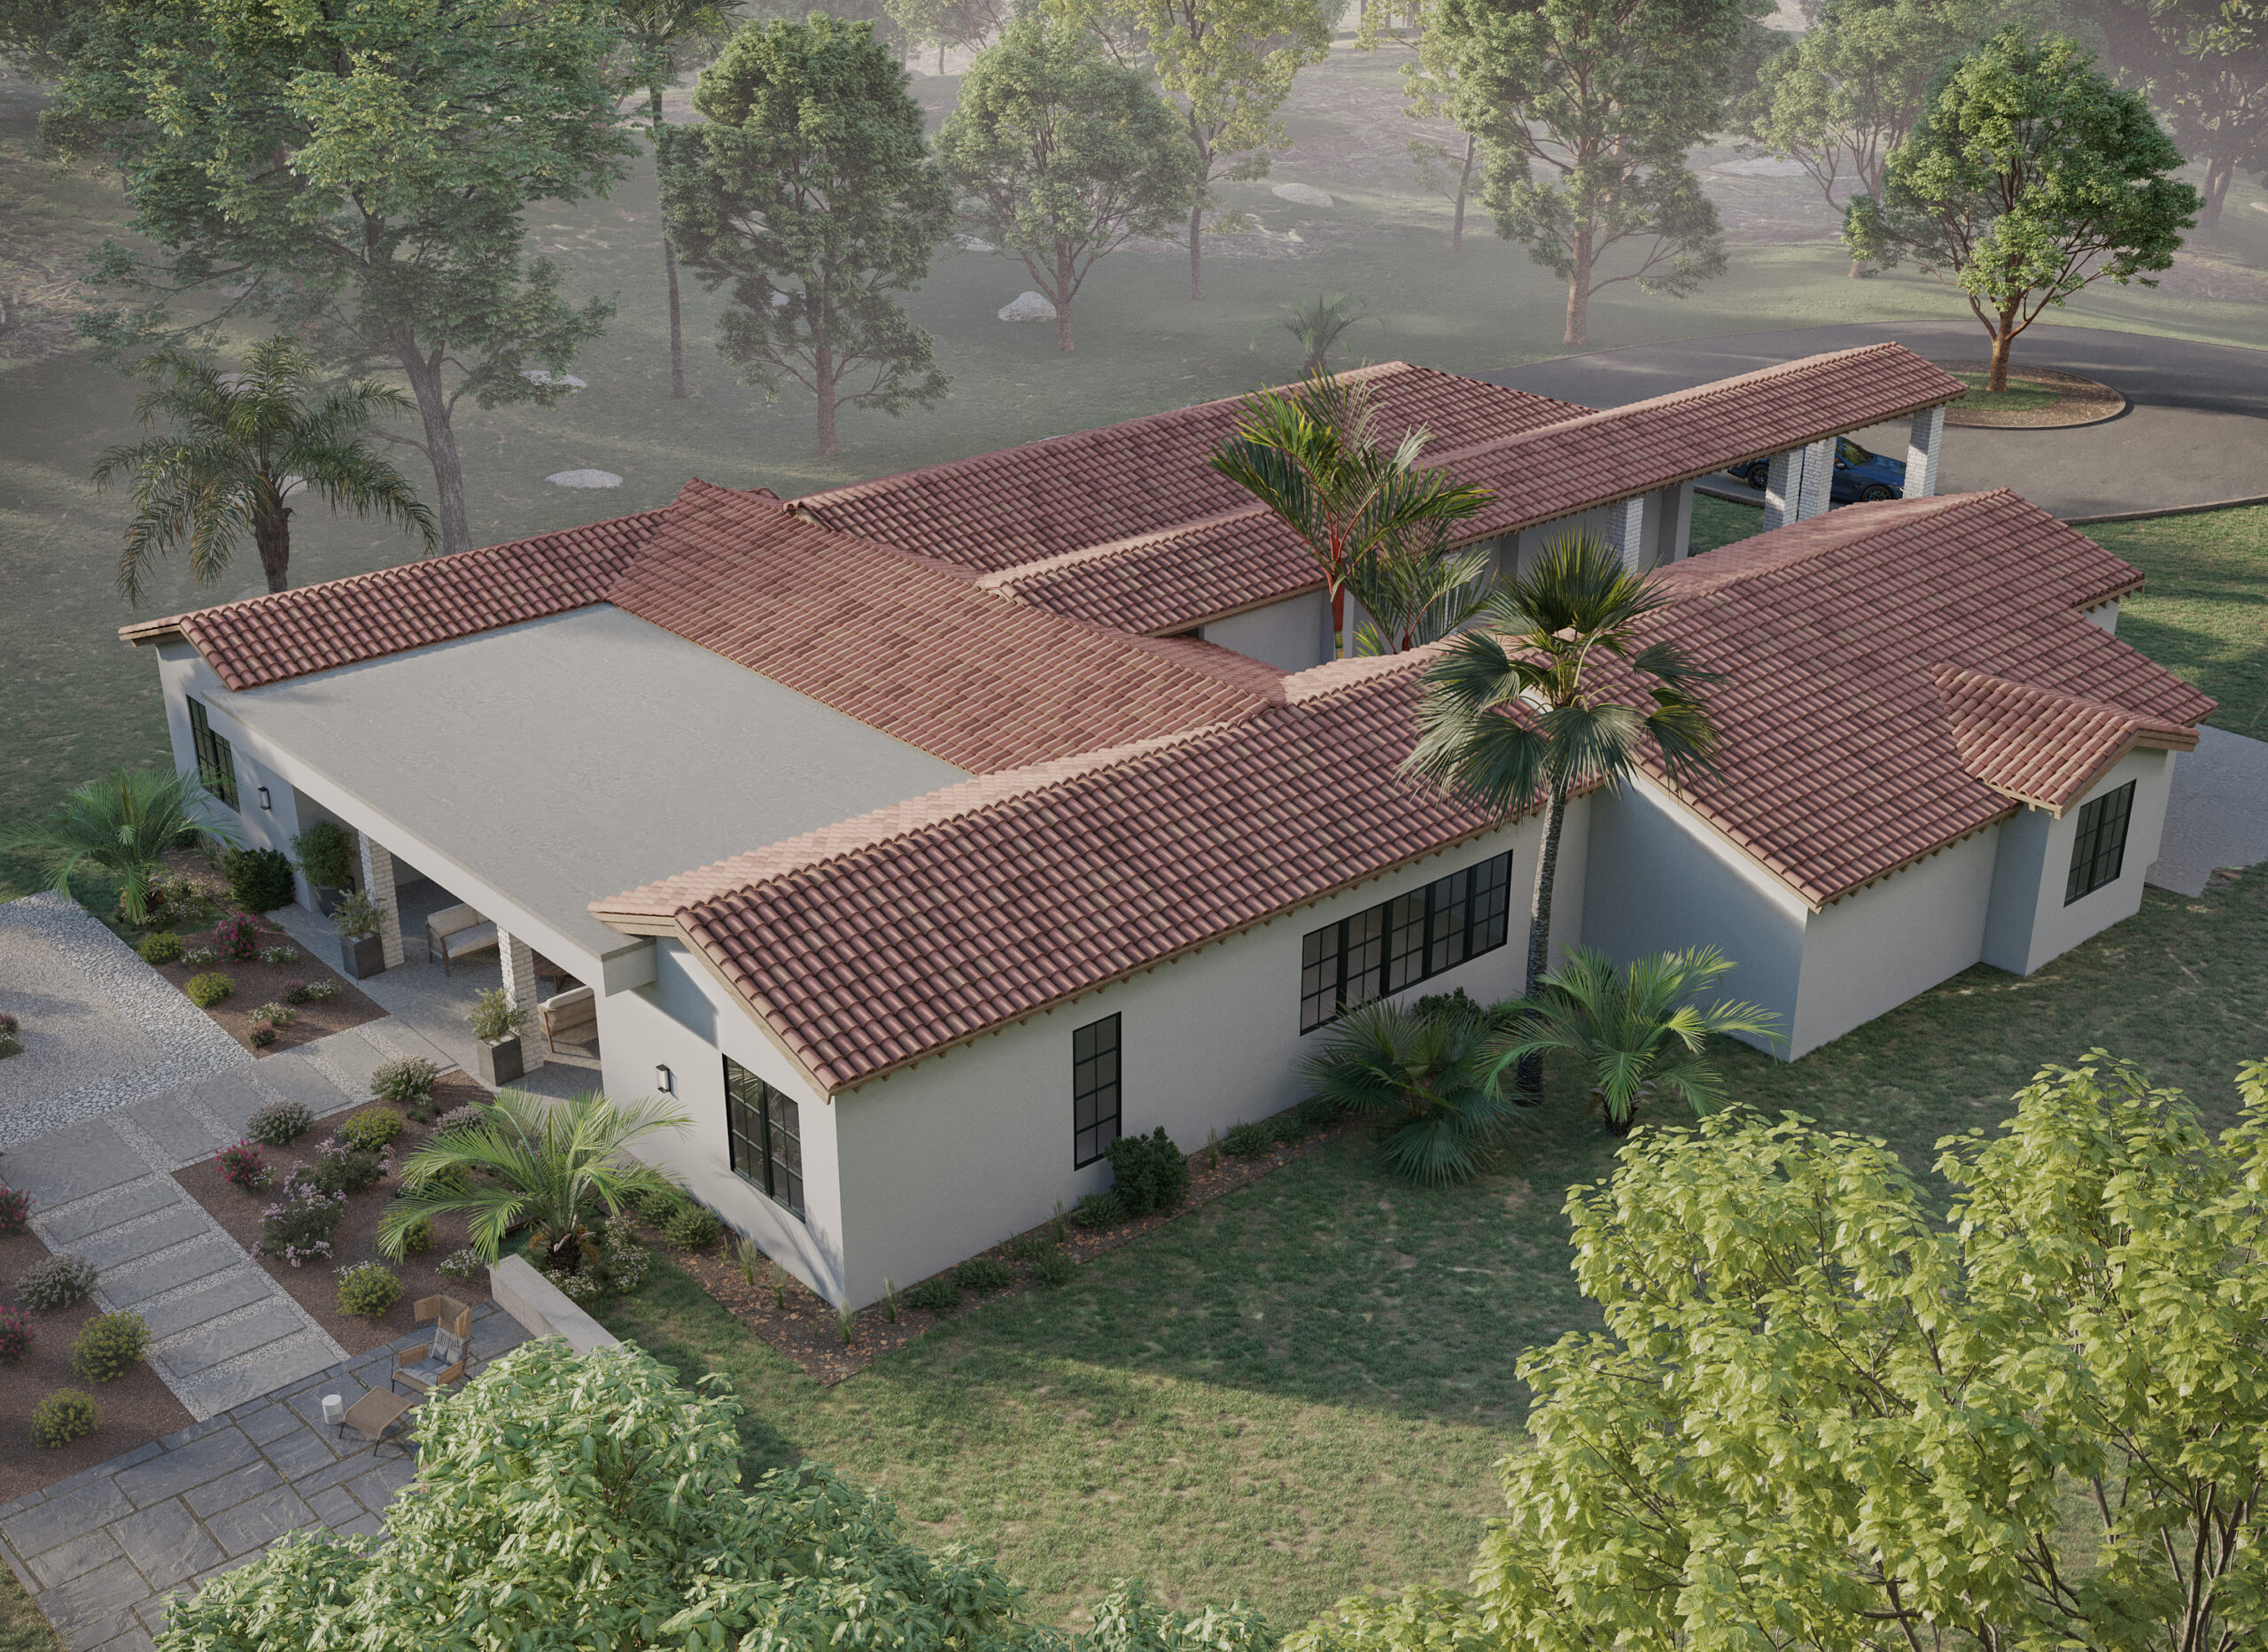 Bird View Photorealistic Single Family House Exterior Rendering